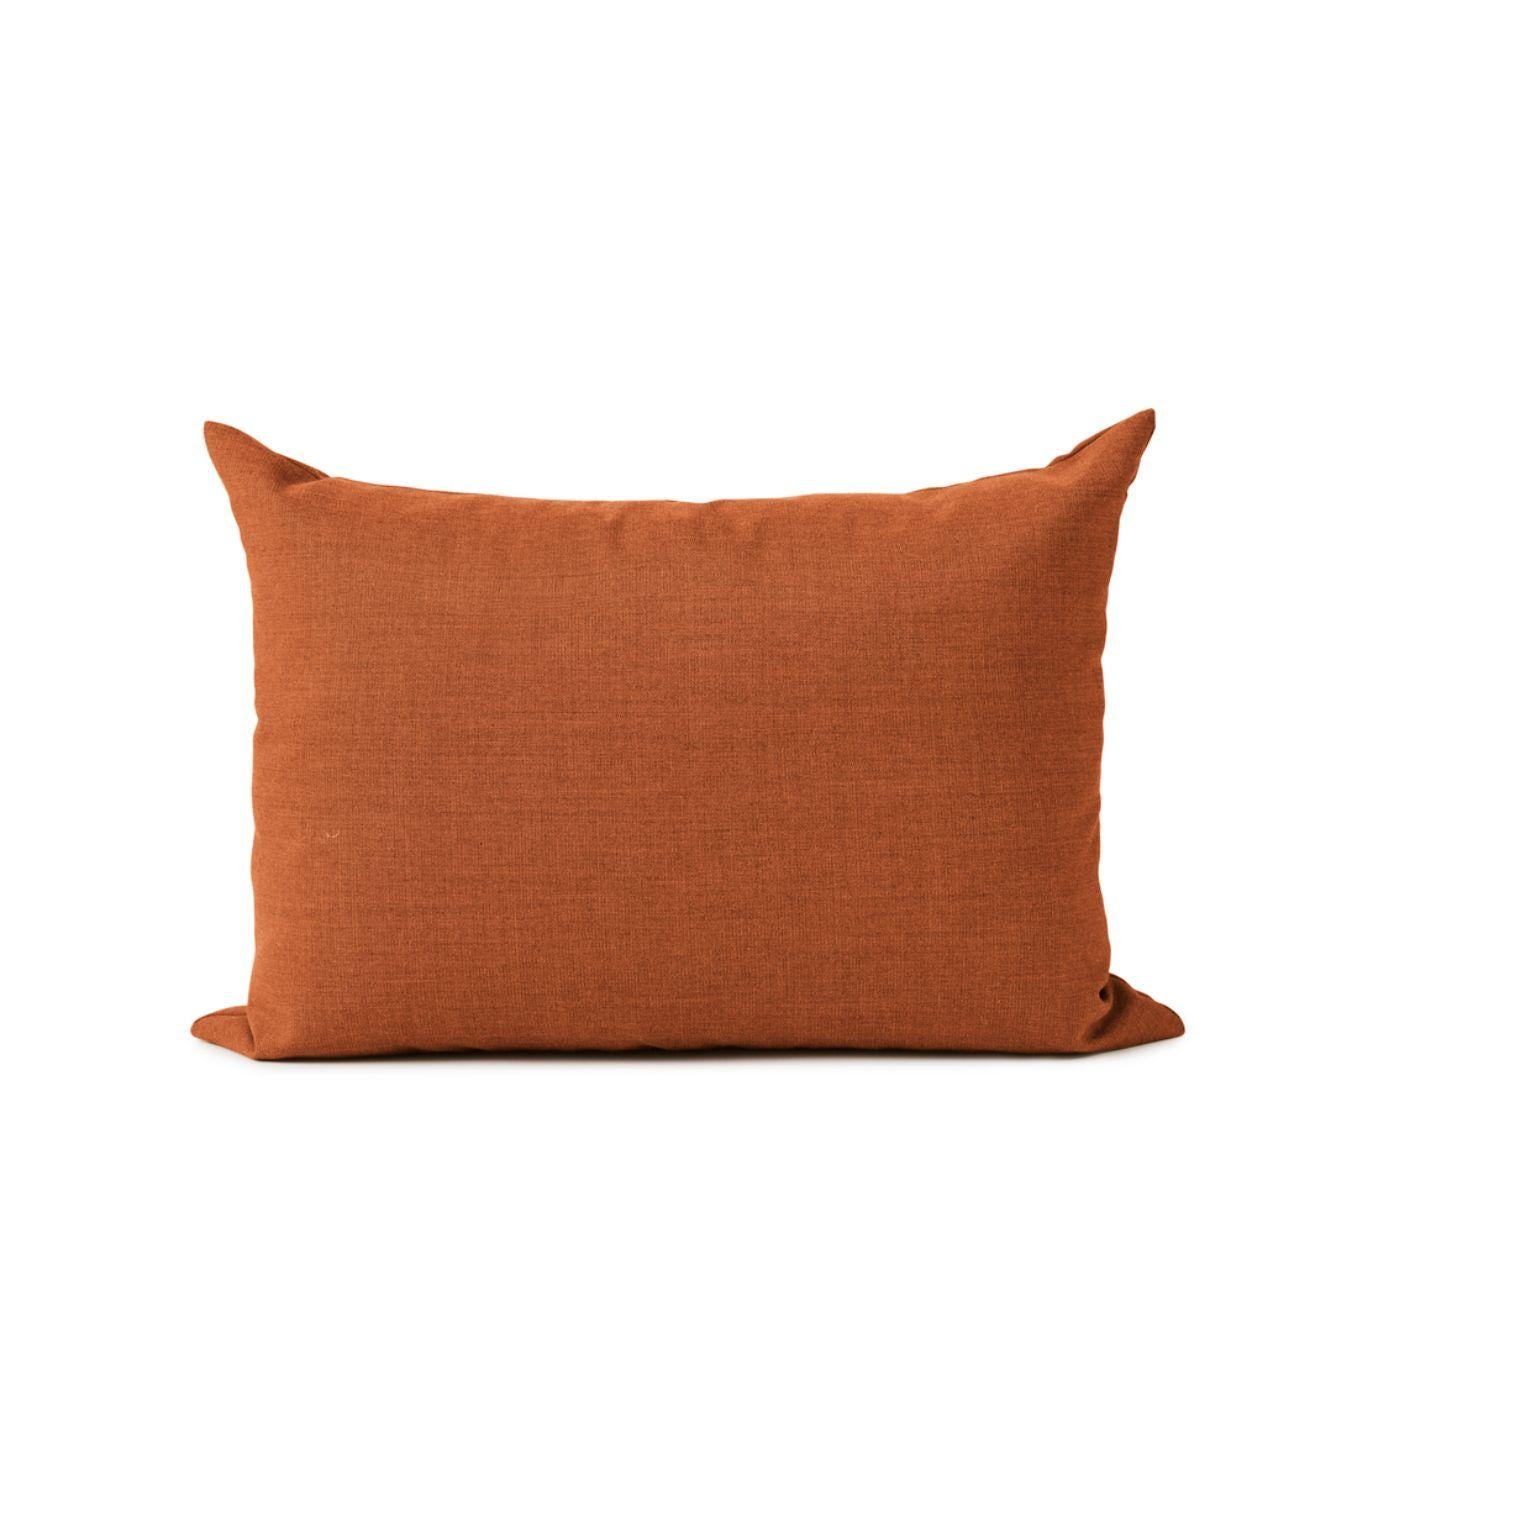 Galore cushion square burnt orange by Warm Nordic
Dimensions: D70 x H 50 cm
Material: Textile upholstery, Granulate and feathers filling.
Weight: 1.4 kg
Also available in different colours and finishes. 

An elegant oversized sofa cushion,